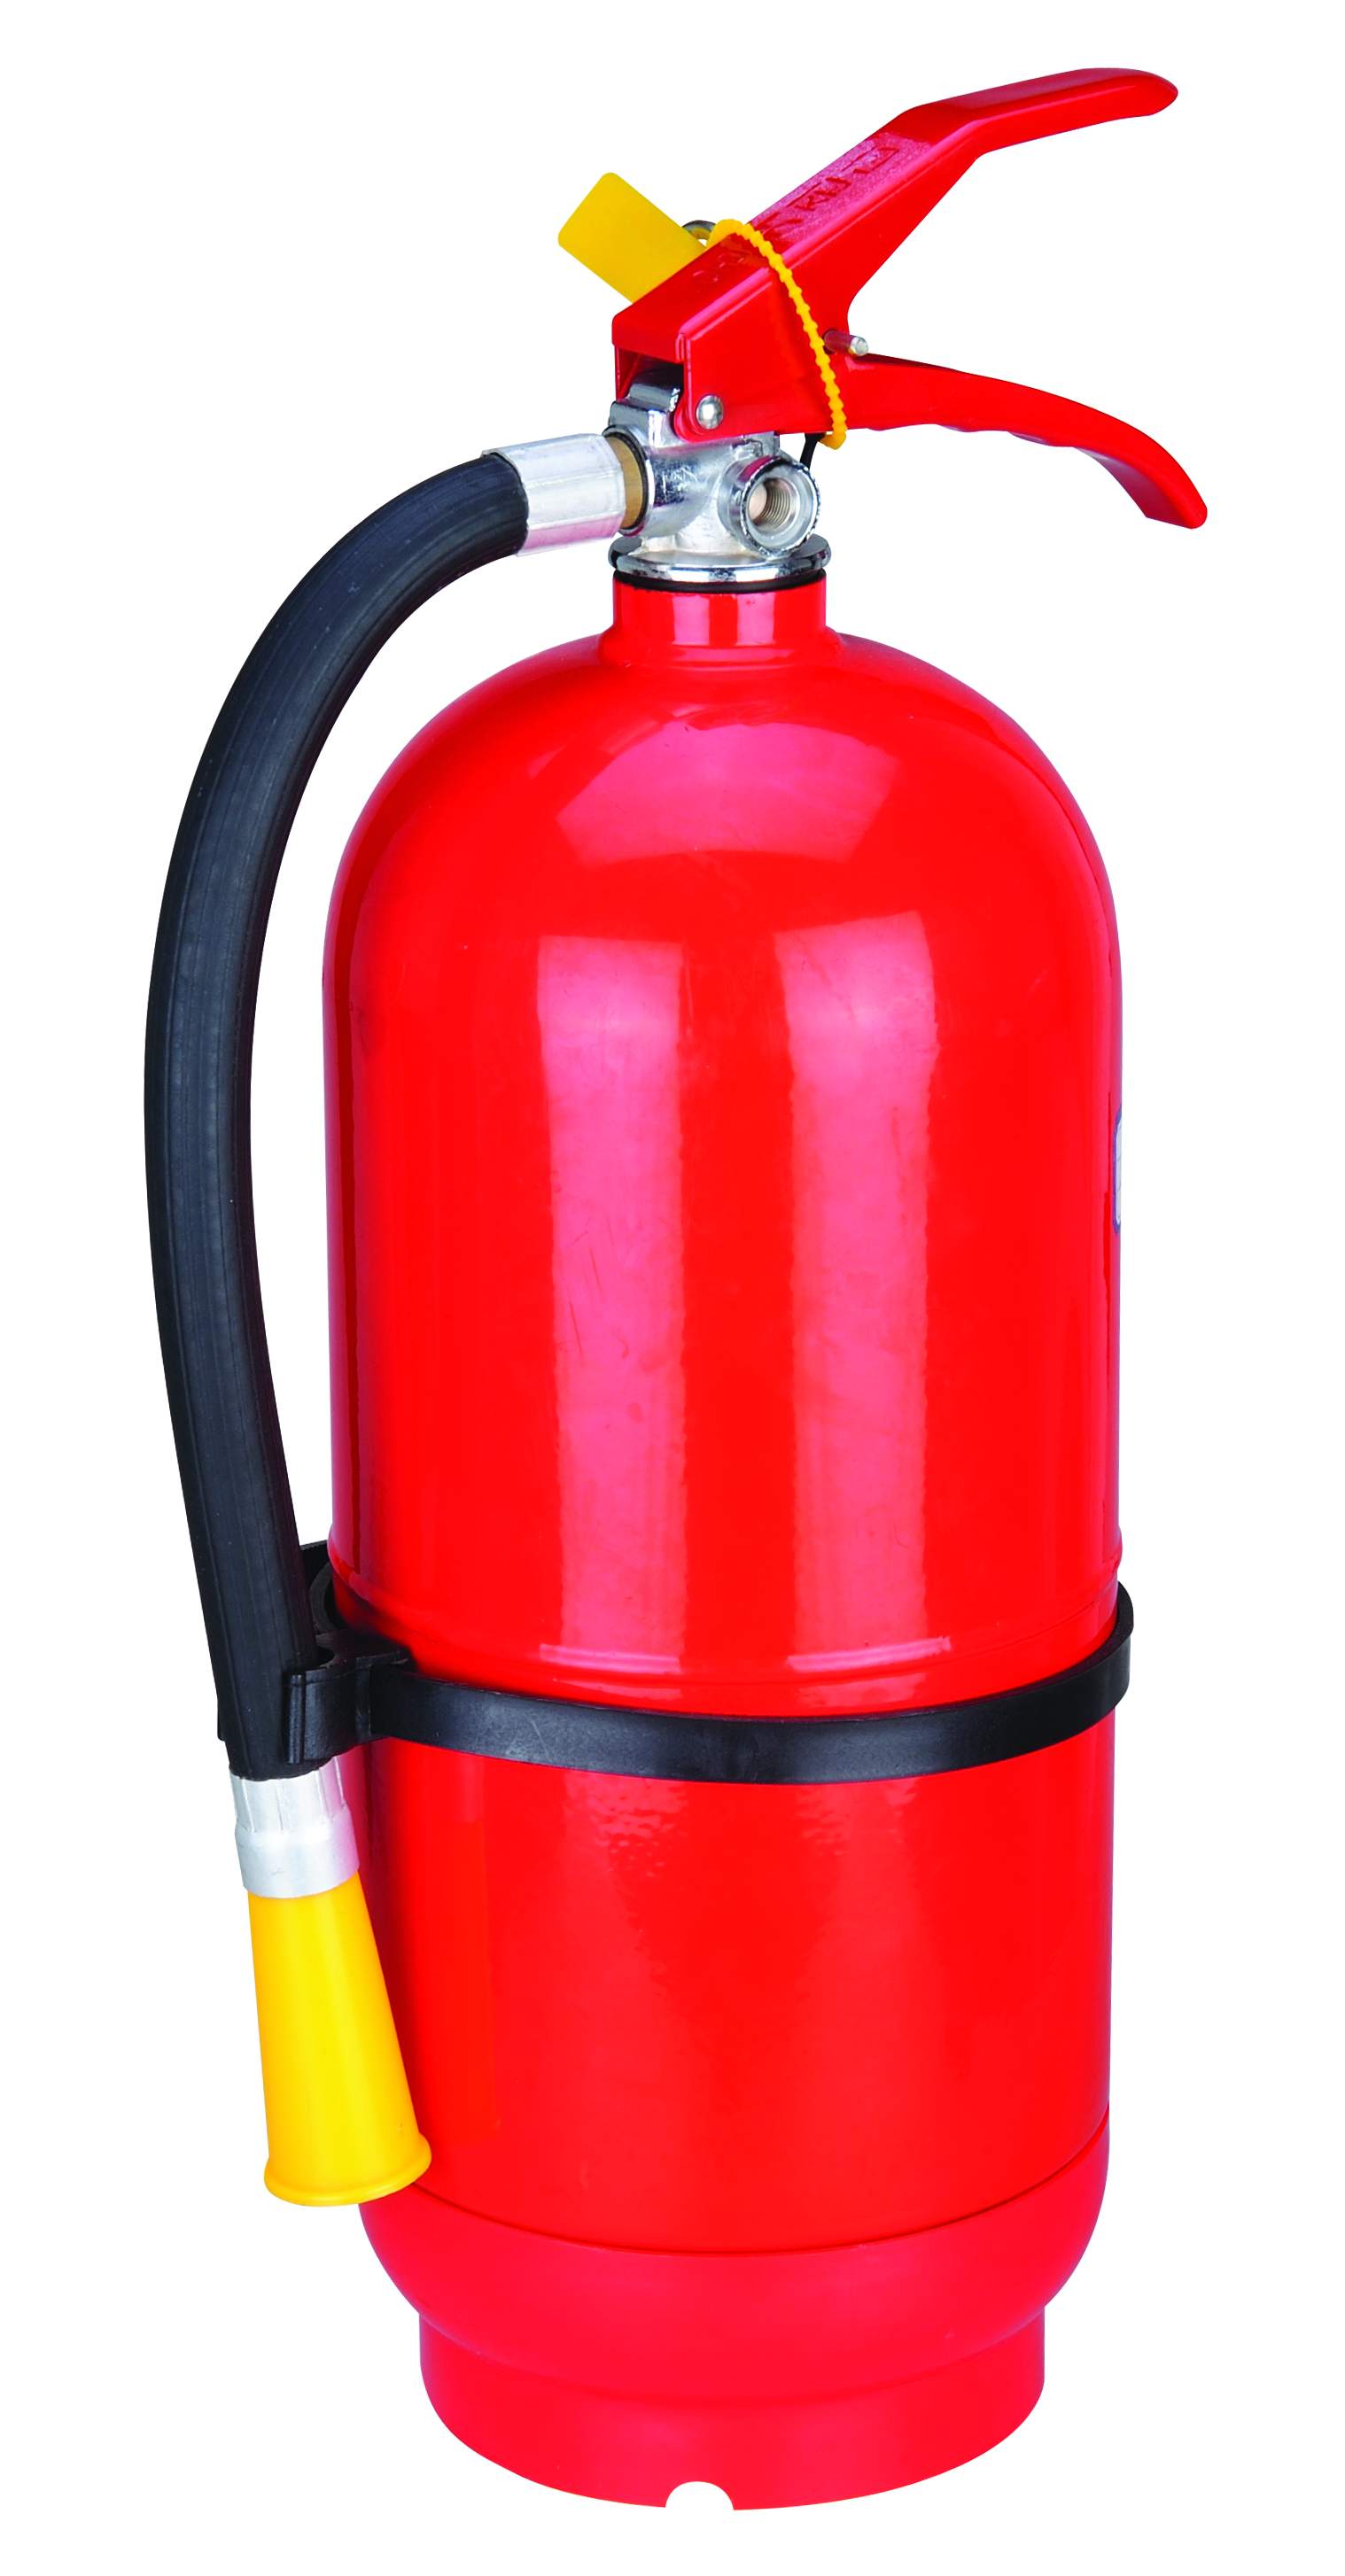 fire extinguisher clipart - photo #24